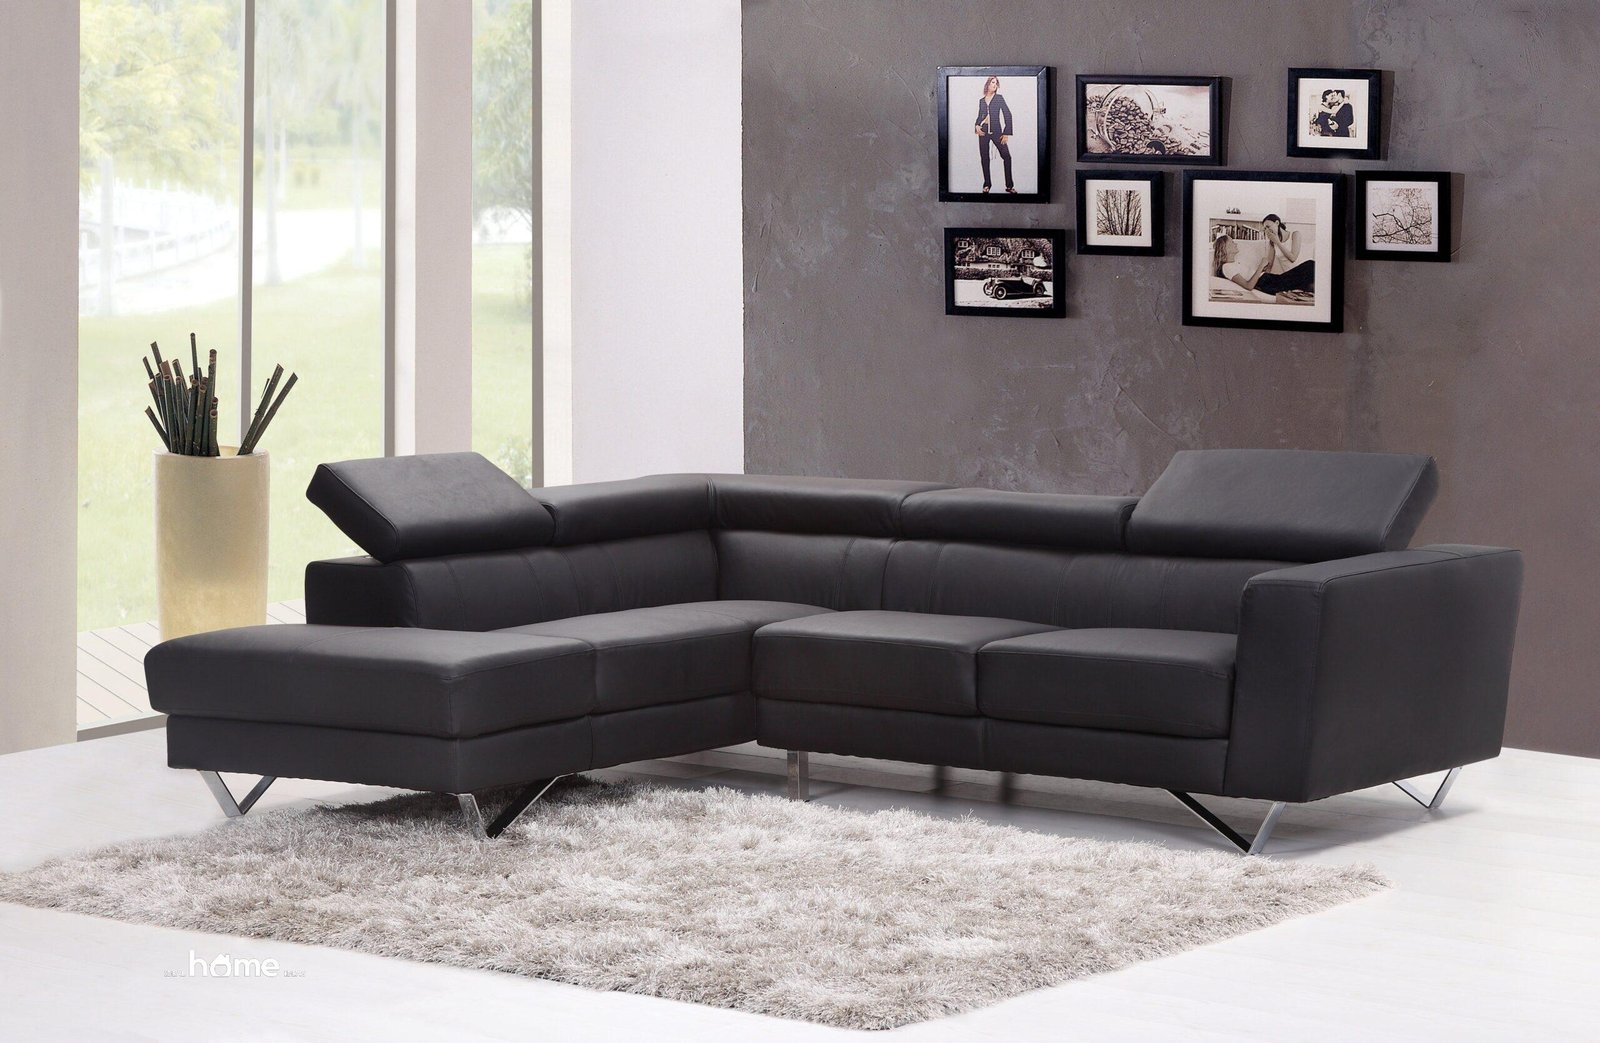 Choosing The Perfect Sofa For Your Living Room